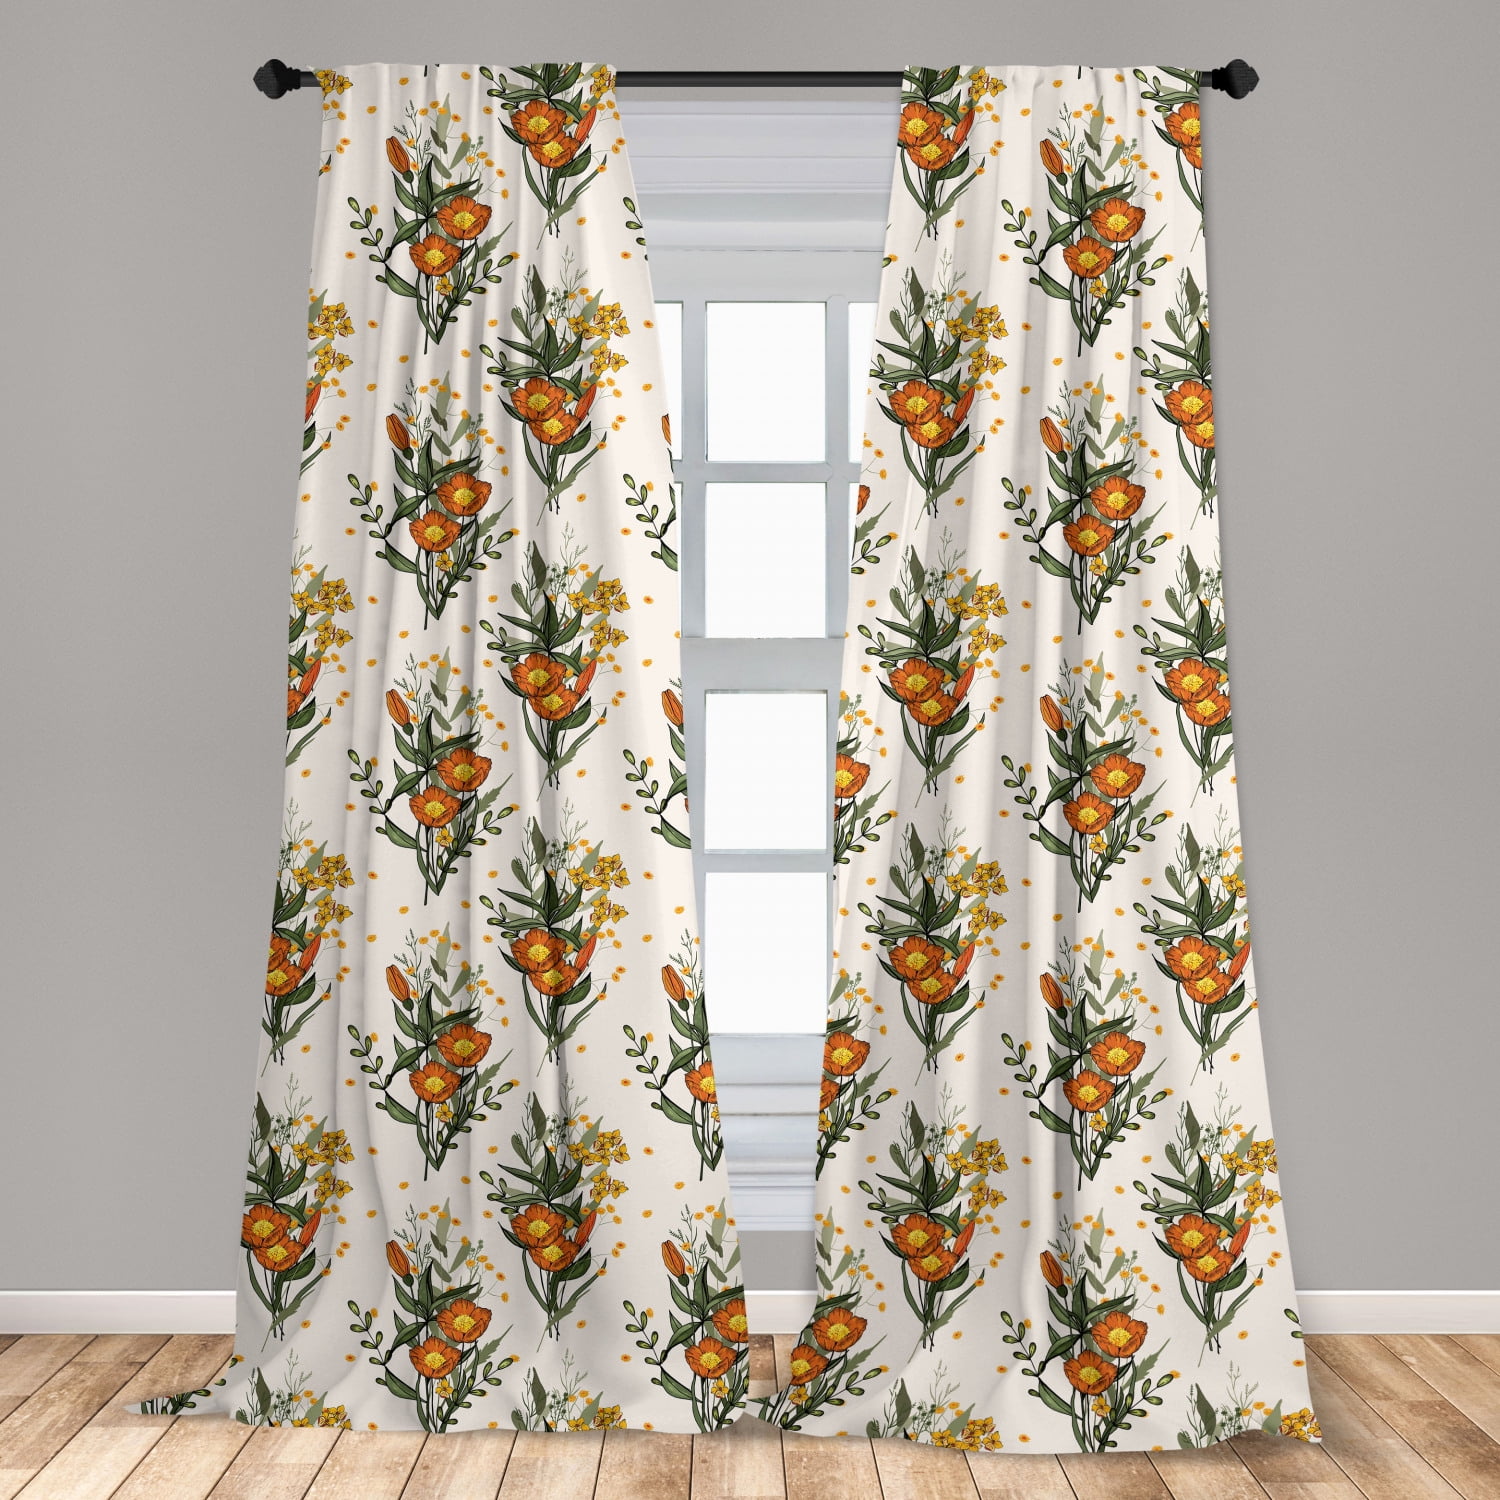 Tropical Hawaii Microfiber Curtains 2 Panel Set Living Room Bedroom in 3 Sizes 